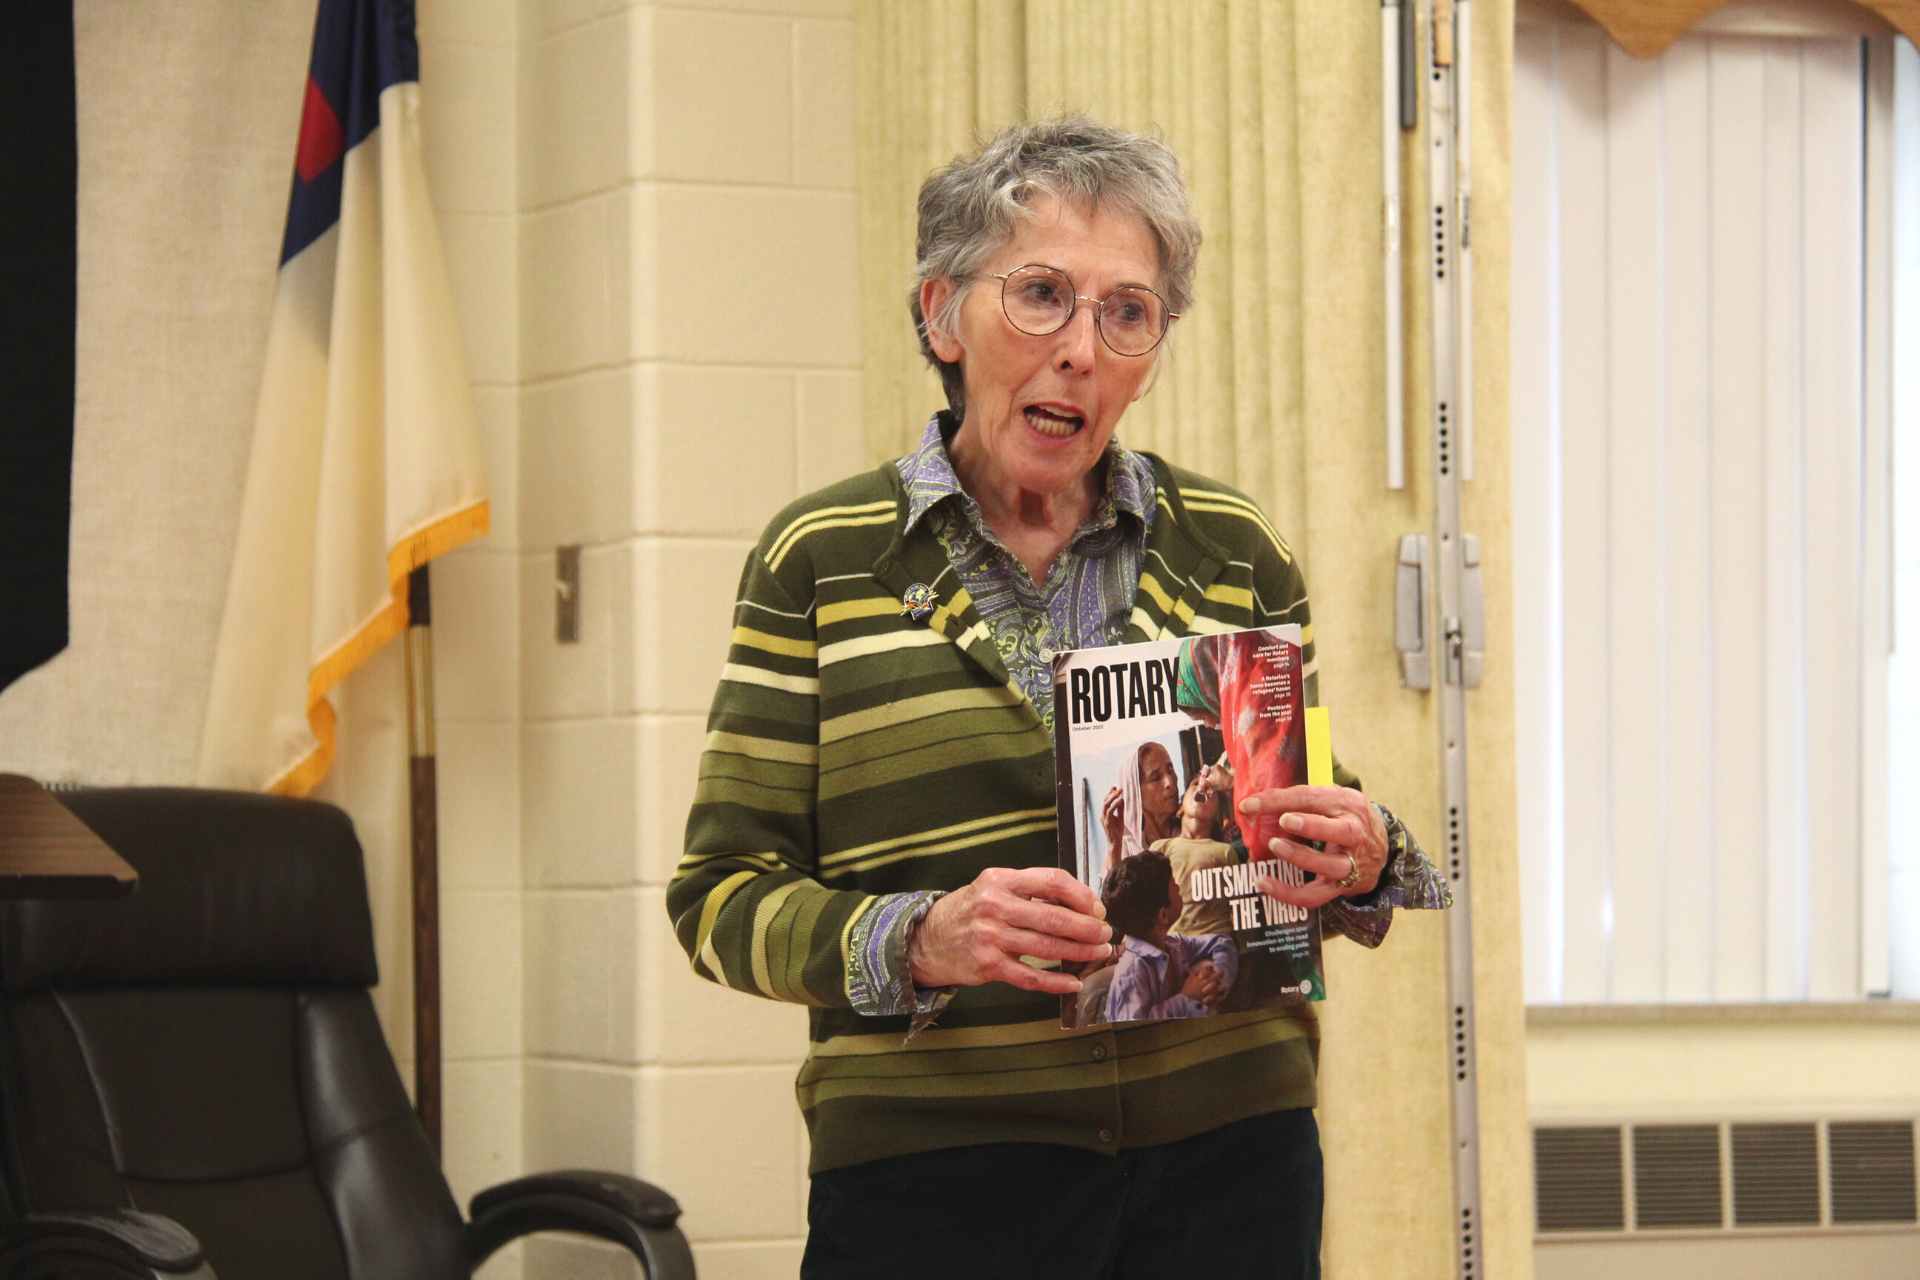 Marty Kelley gave an update to the Rotary Club of Buckhannon-Upshur Nov. 15 about Rotary and its efforts to eliminate polio. / Photo by Monica Zalaznik